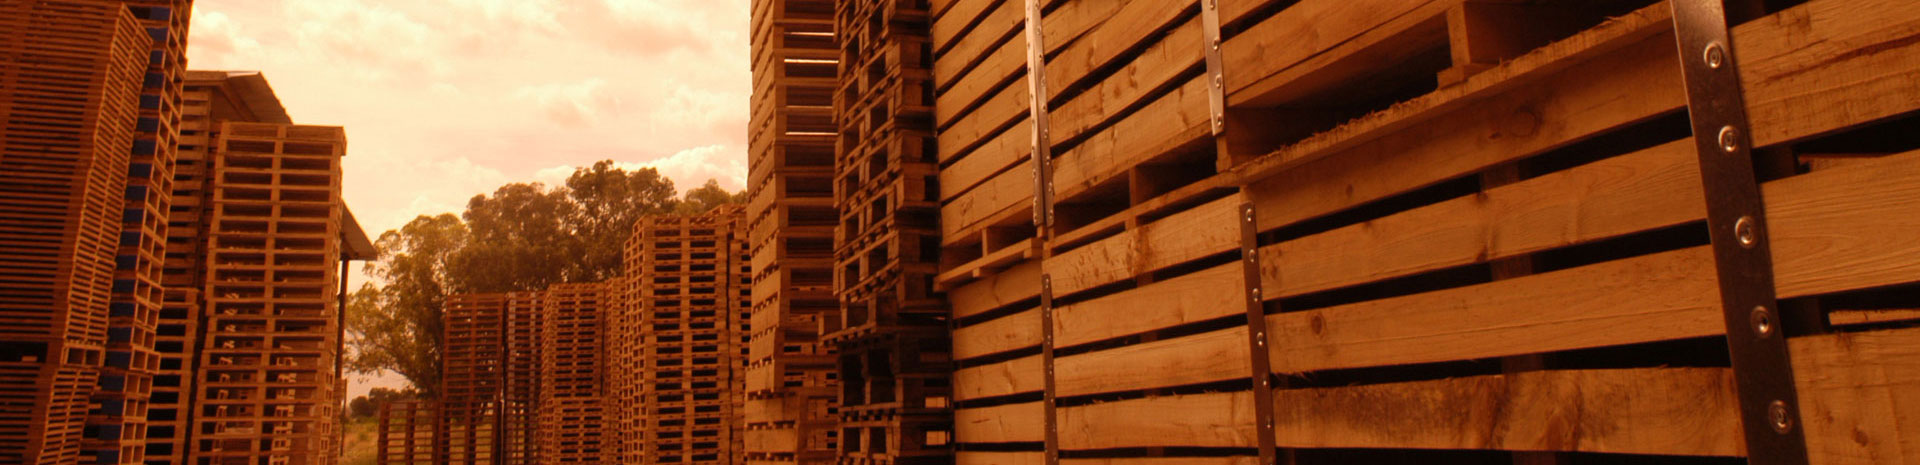 Pallet Supply Company Wooden Pallets